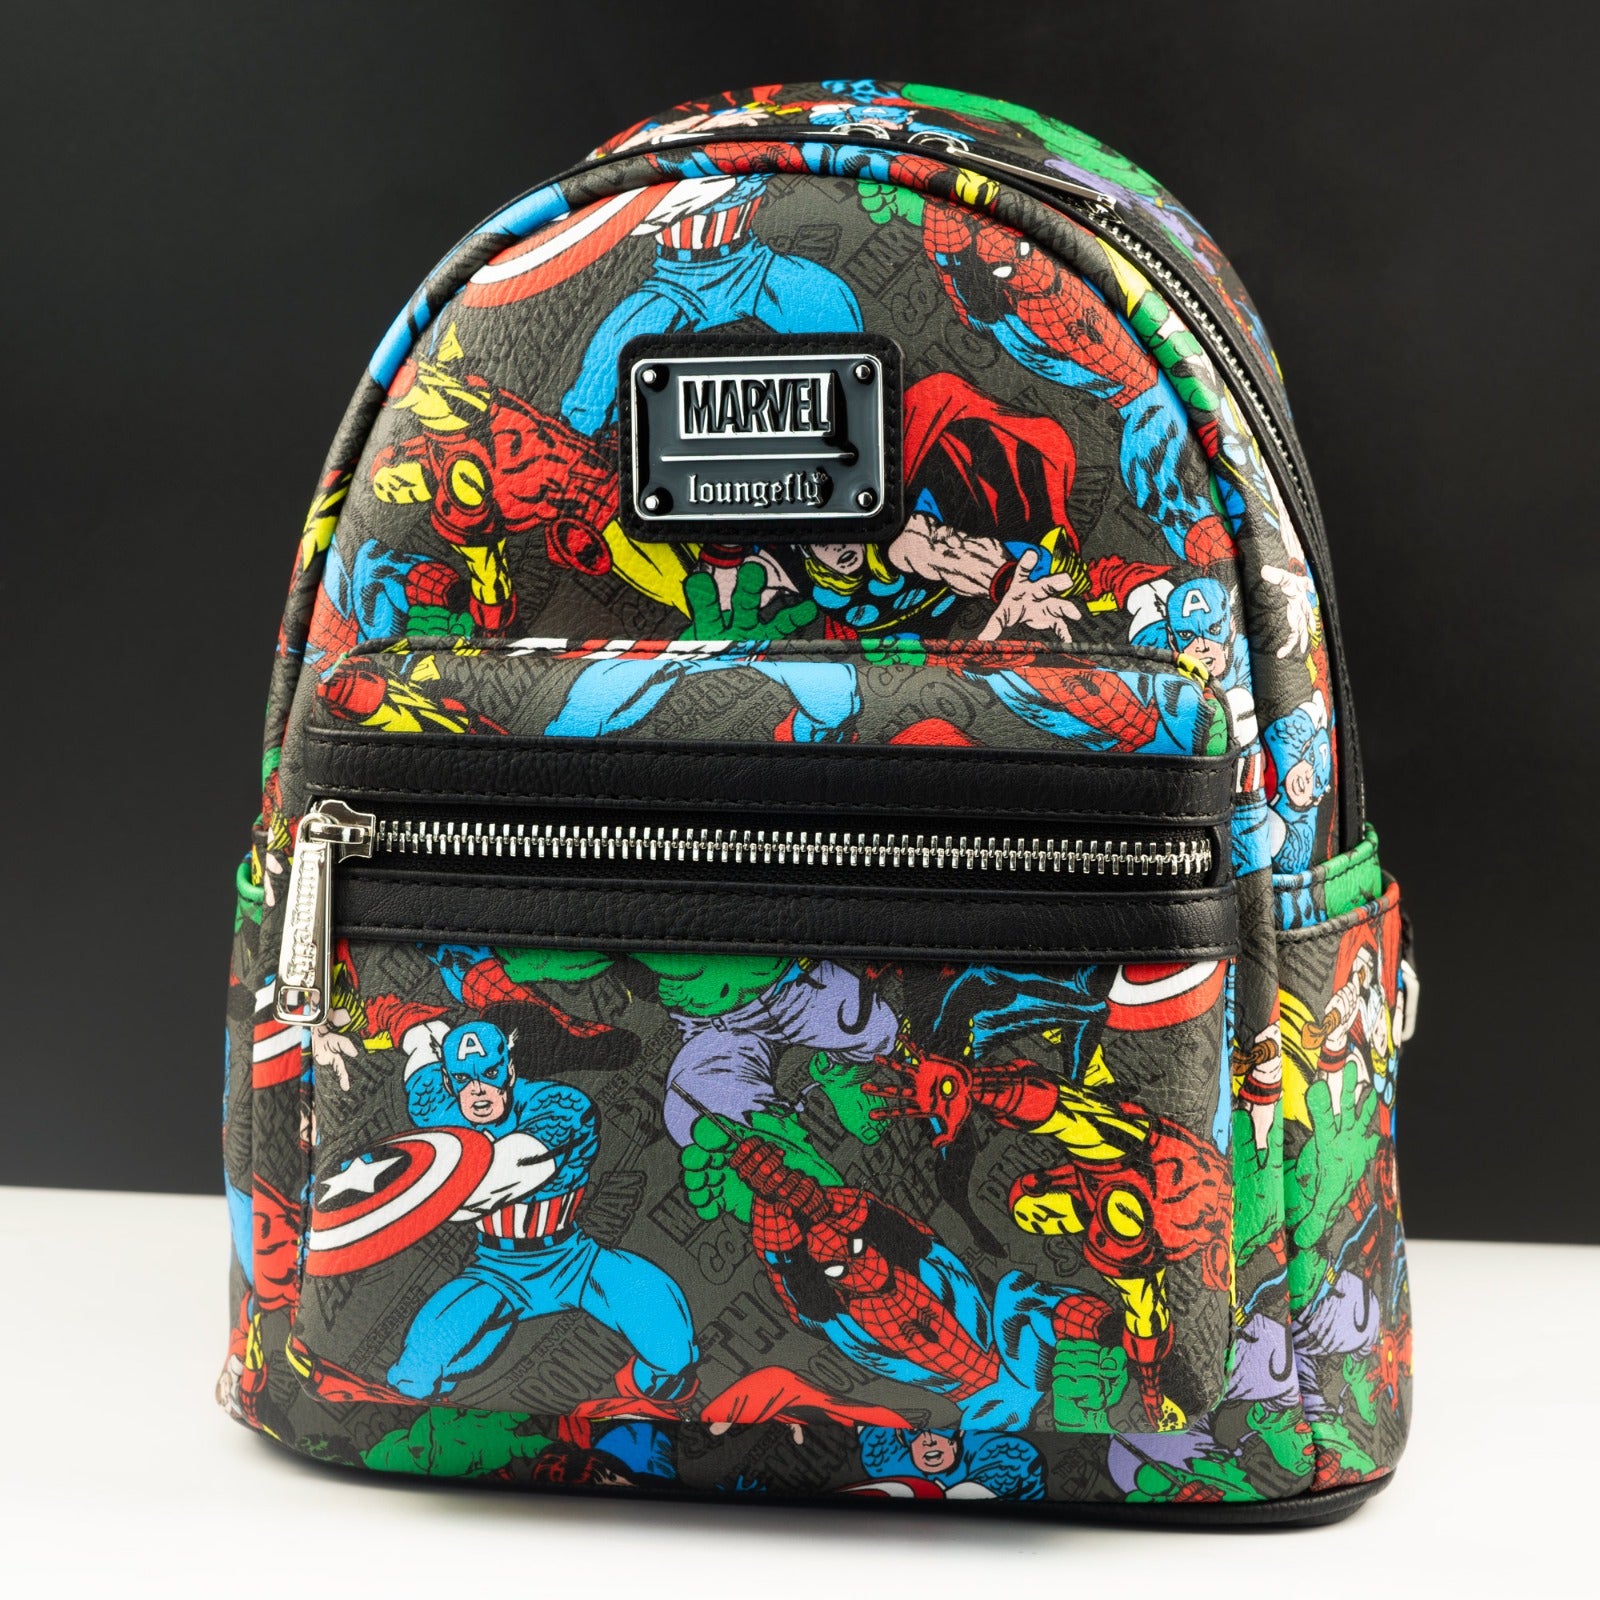 Loungefly x Marvel Comic Book Character Poses AOP Mini Backpack